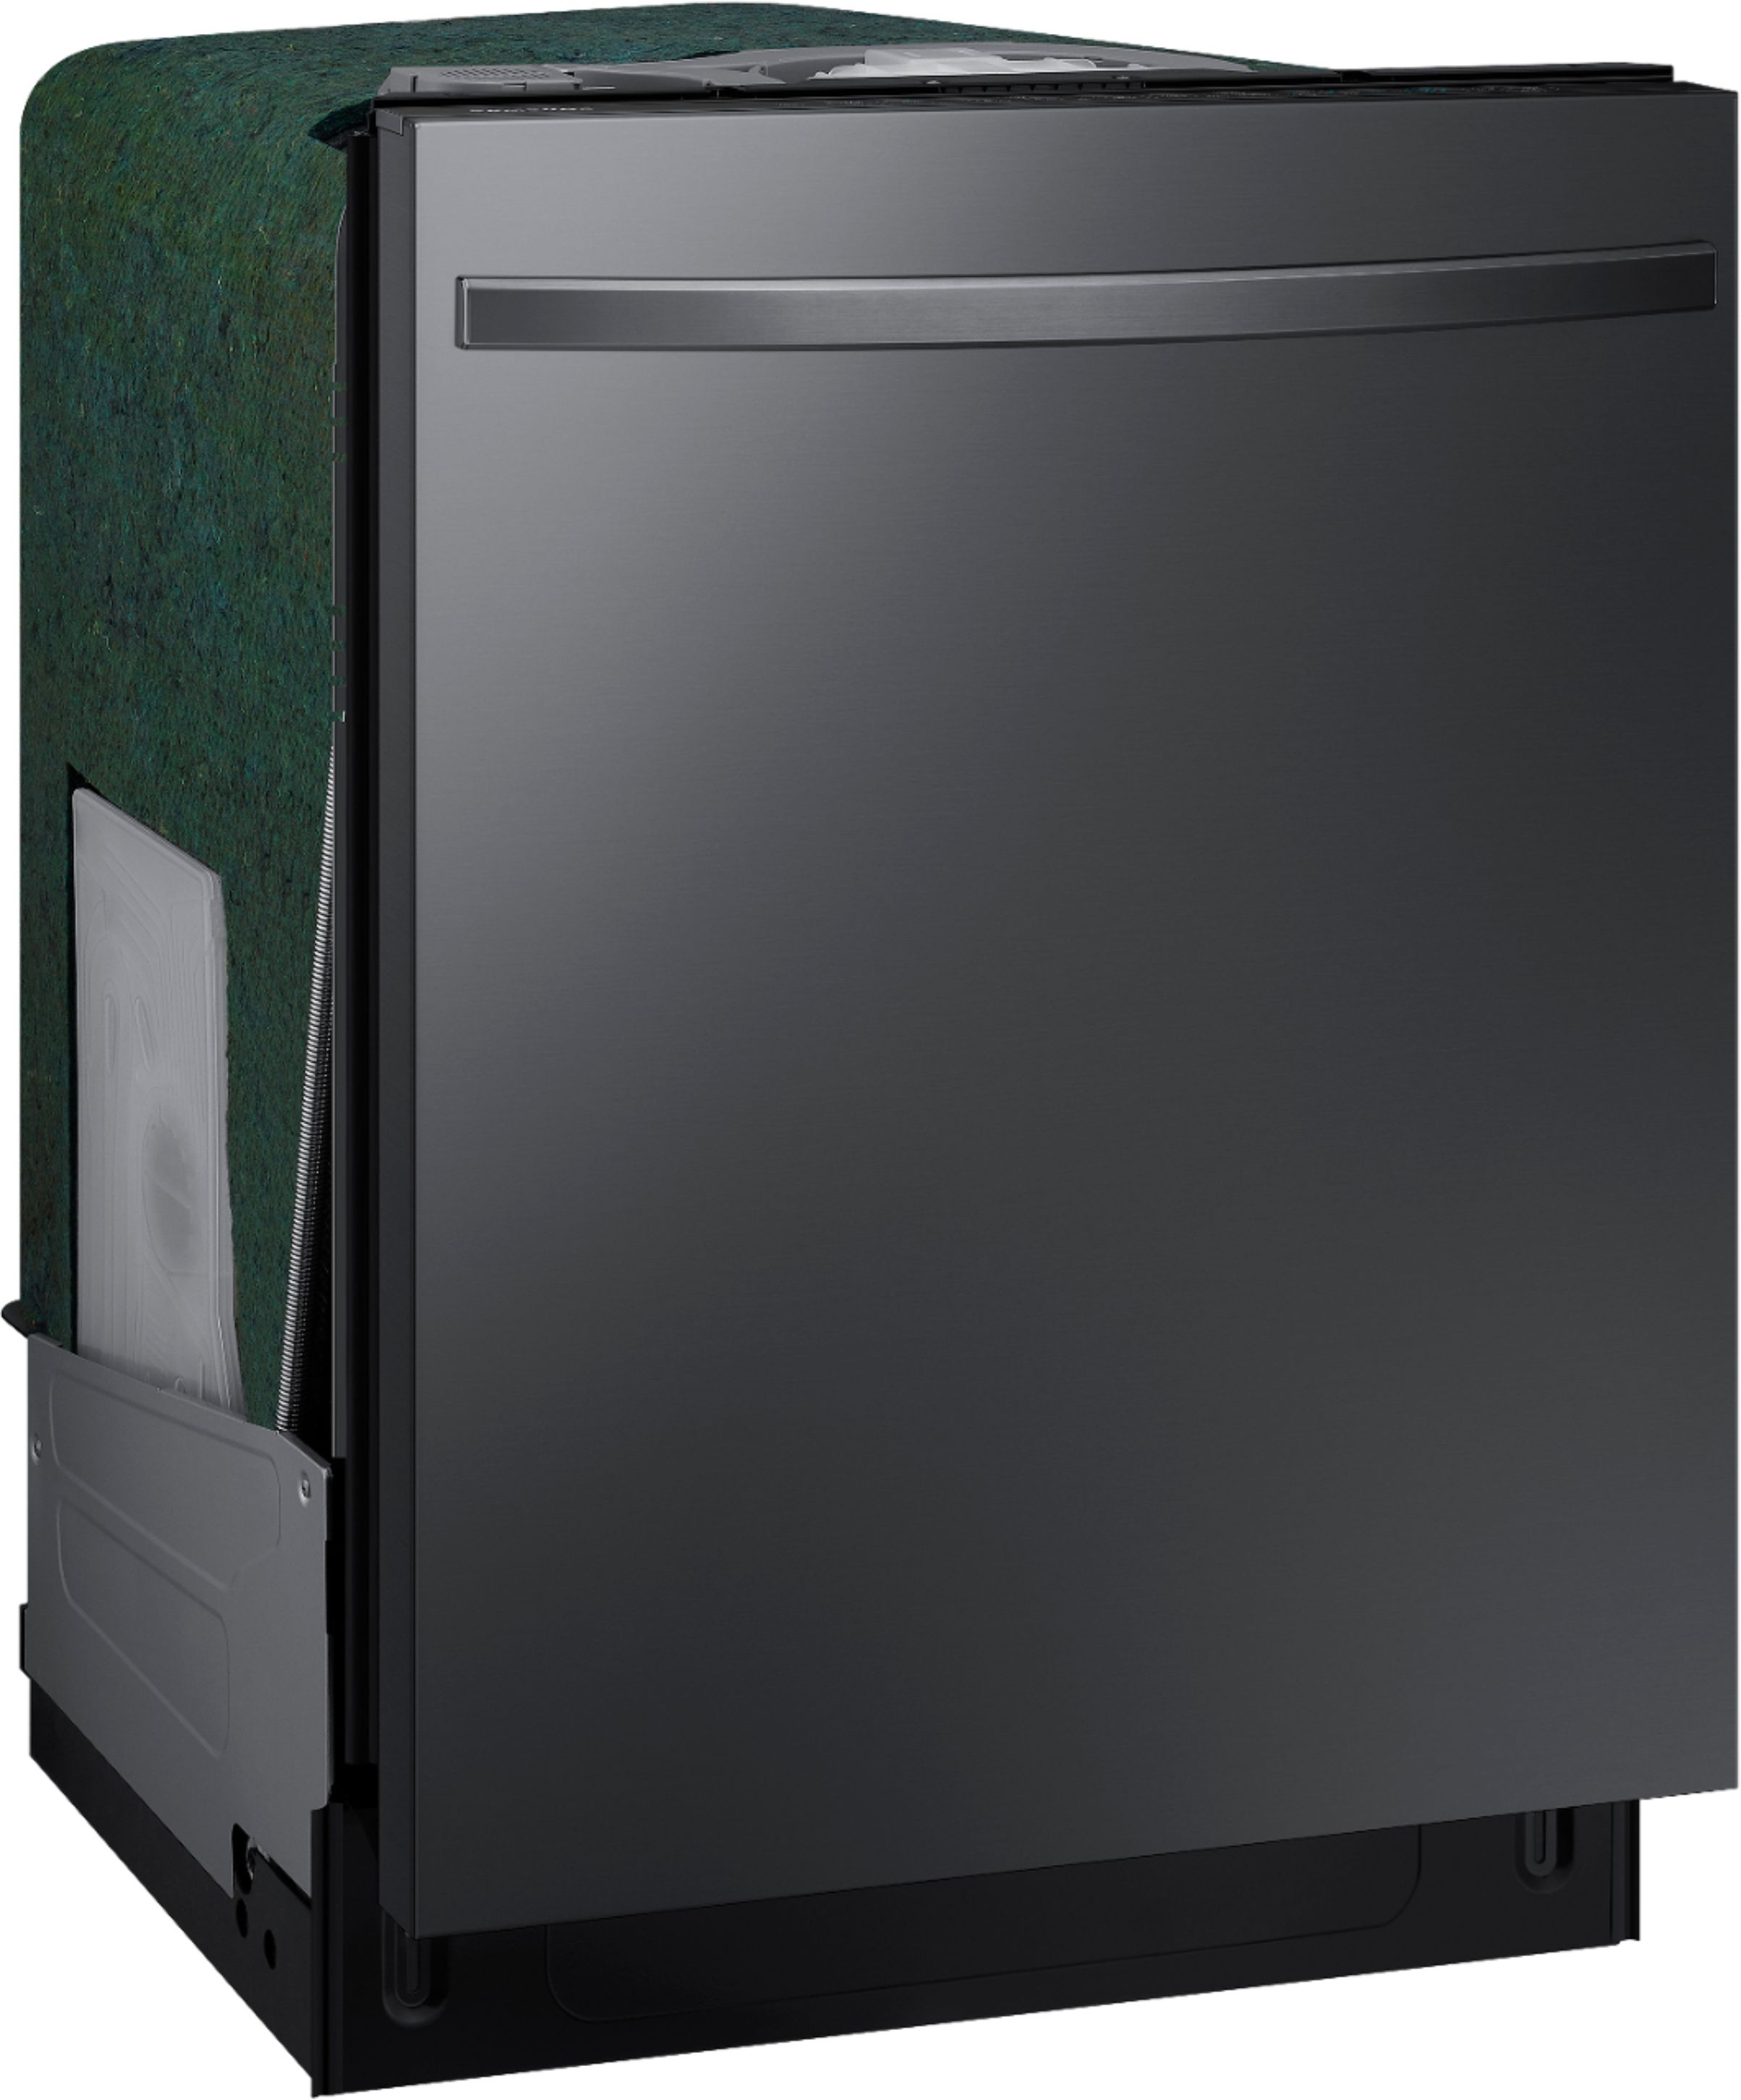 Angle View: Samsung - StormWash 24" Top Control Built-In Dishwasher with AutoRelease Dry, 3rd Rack, 48 dBA - Black Stainless Steel